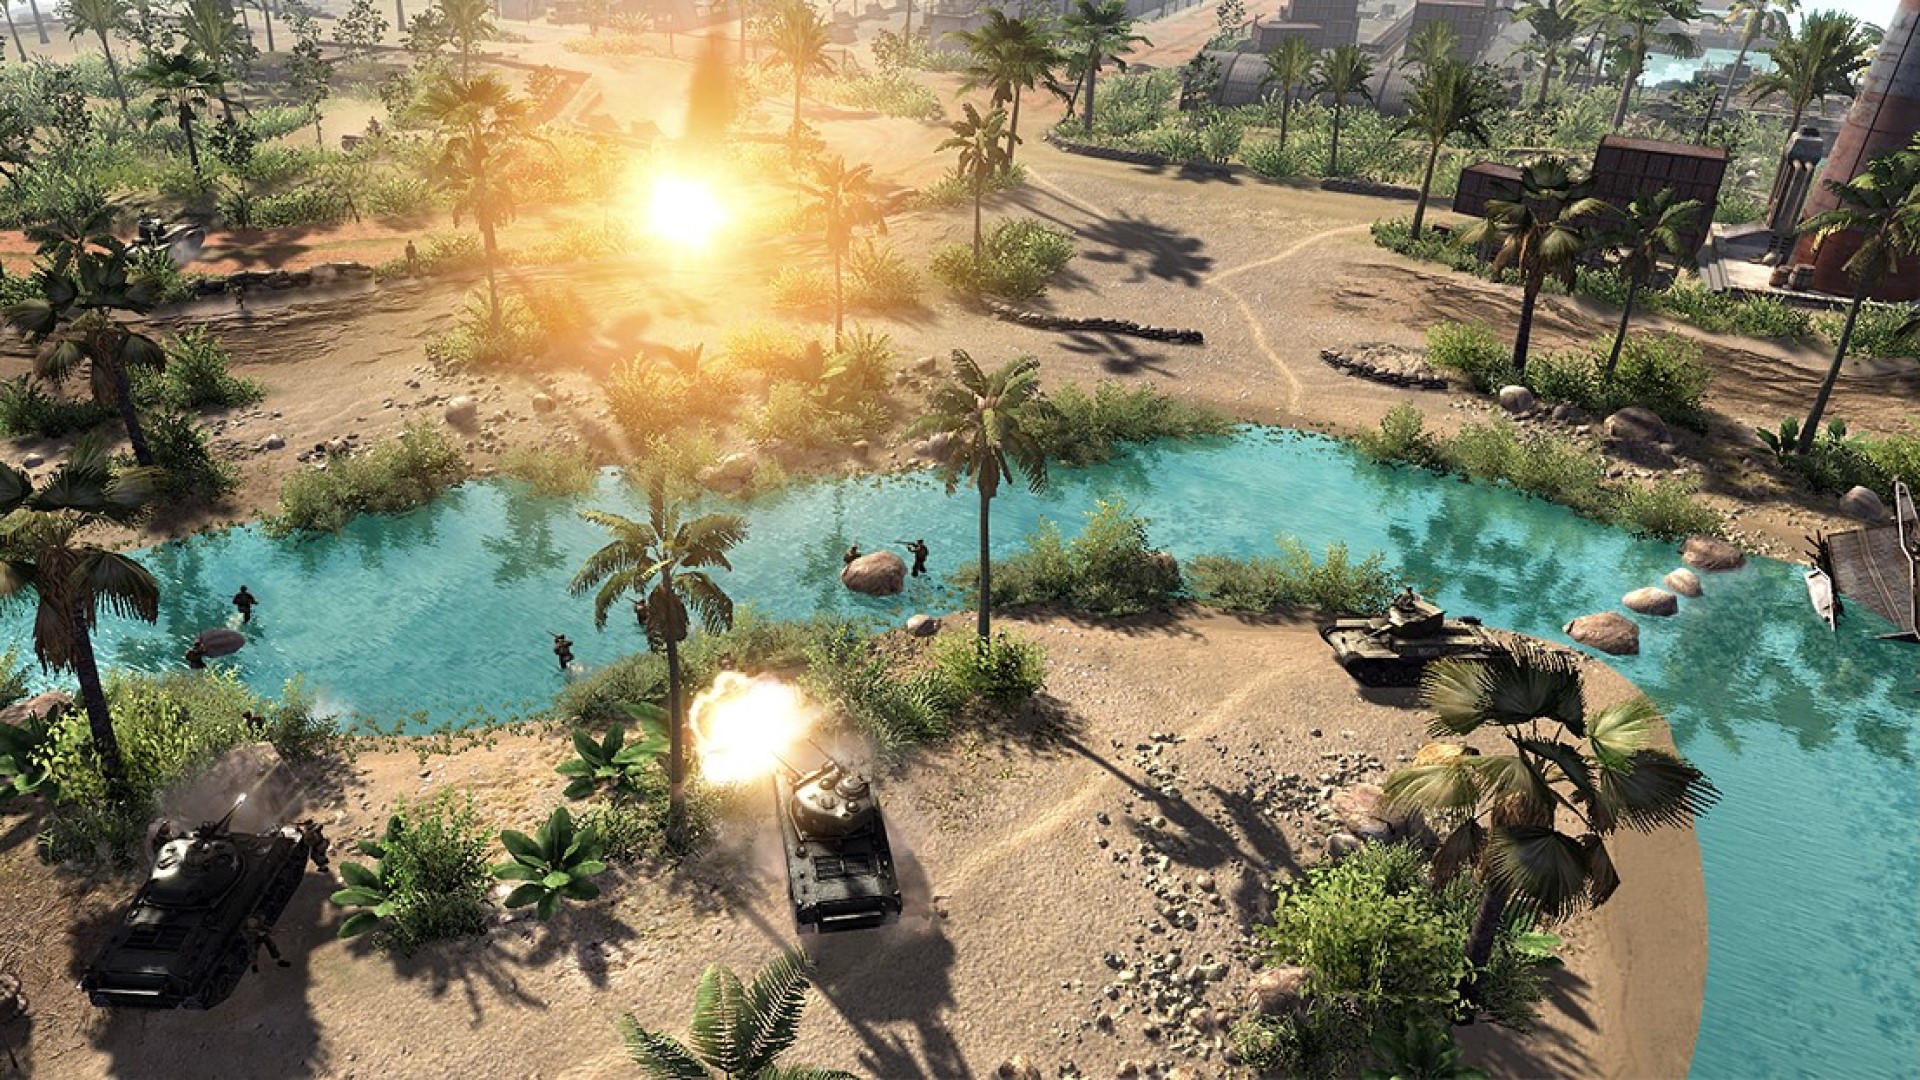 Best WW2 games - screenshot from Men of War: Assault Squad 2 showing tanks assaulting an enemy in a tropical area